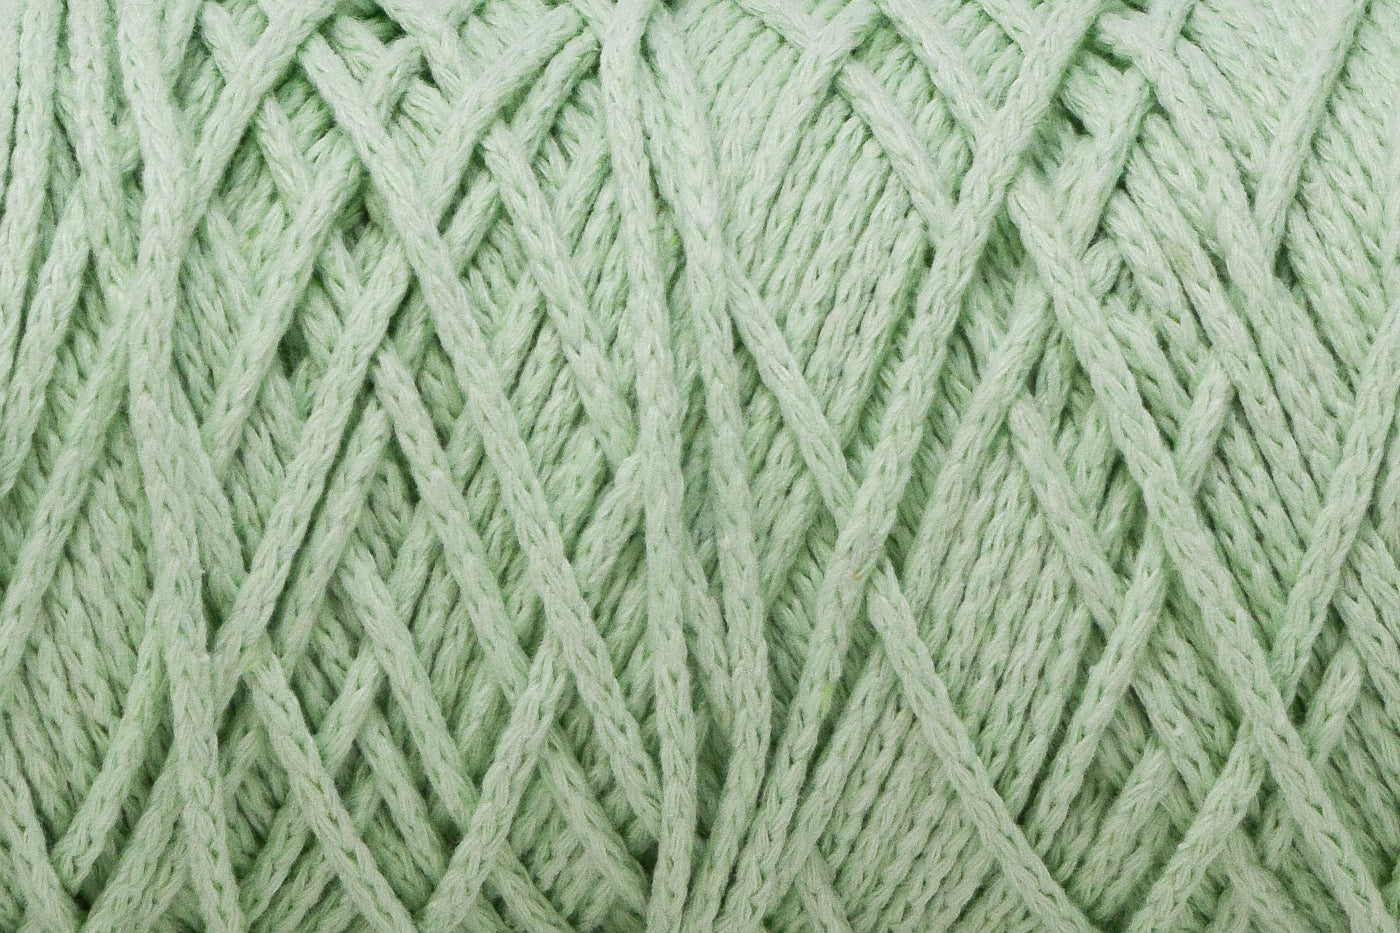 BRAIDED CORD 2 MM ZERO WASTE -  MINT COLOR